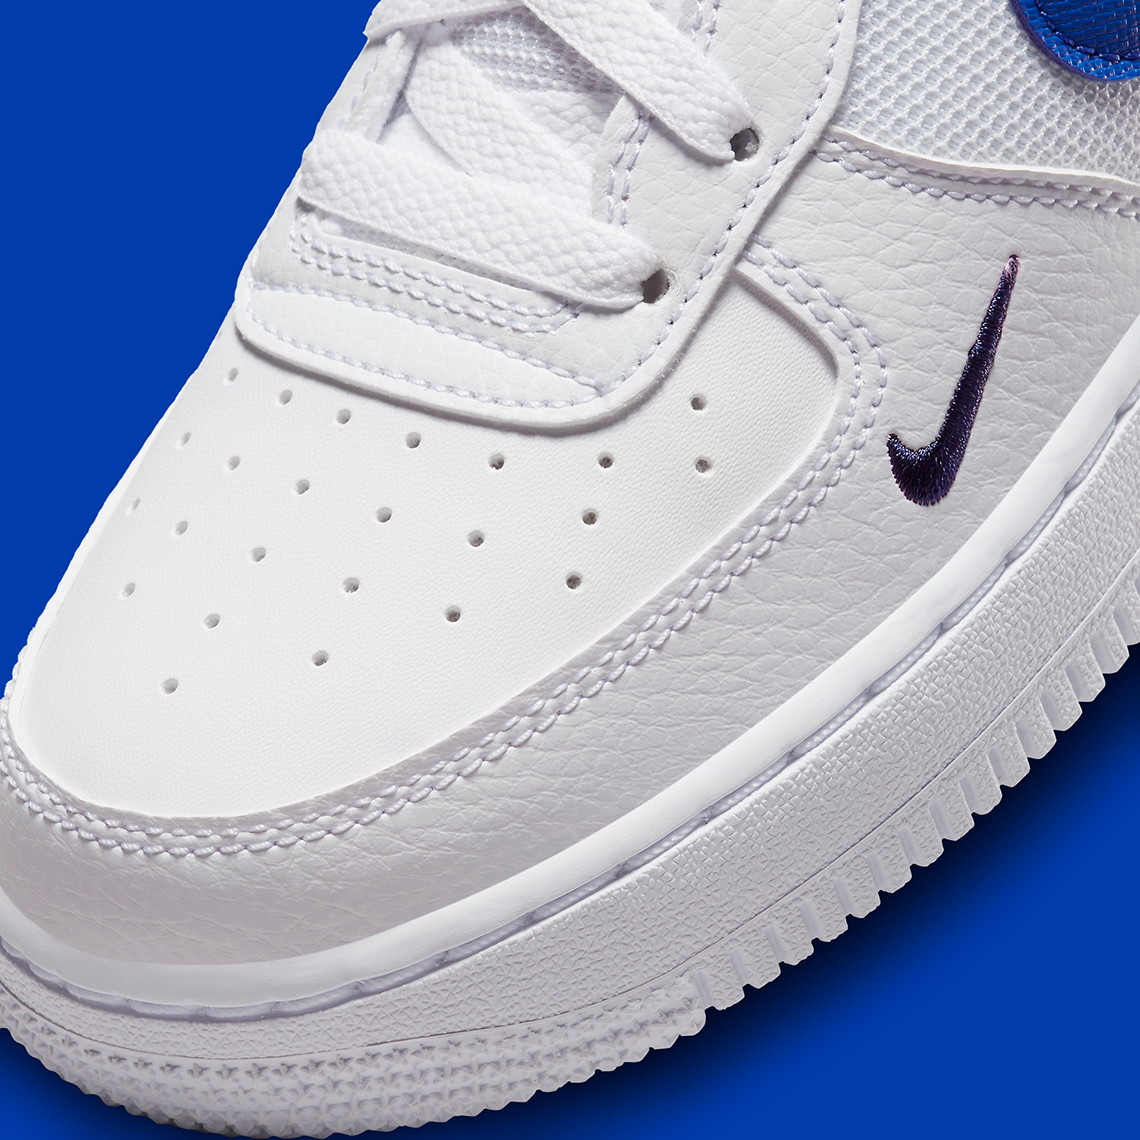 Nike Air Force 1 Low Gs White Royal Fn3875 100 2